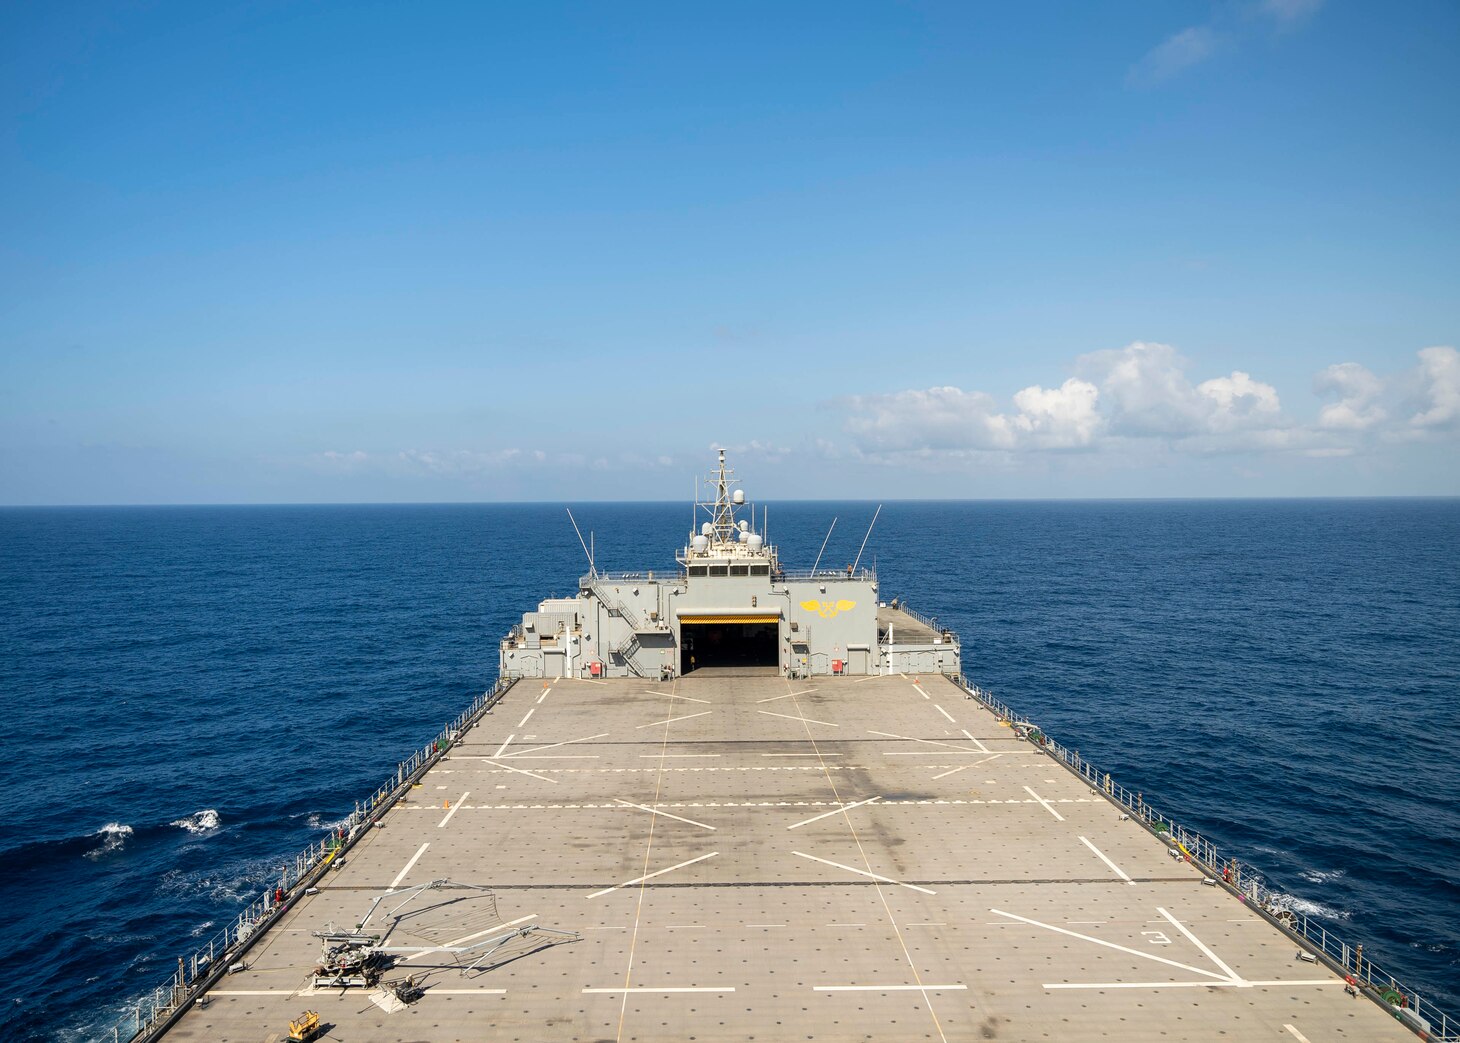 The Lewis B. Puller-class expeditionary sea base USS Hershel "Woody" Williams (ESB 4) sails through the Mozambique Channel, Aug. 18, 2022.